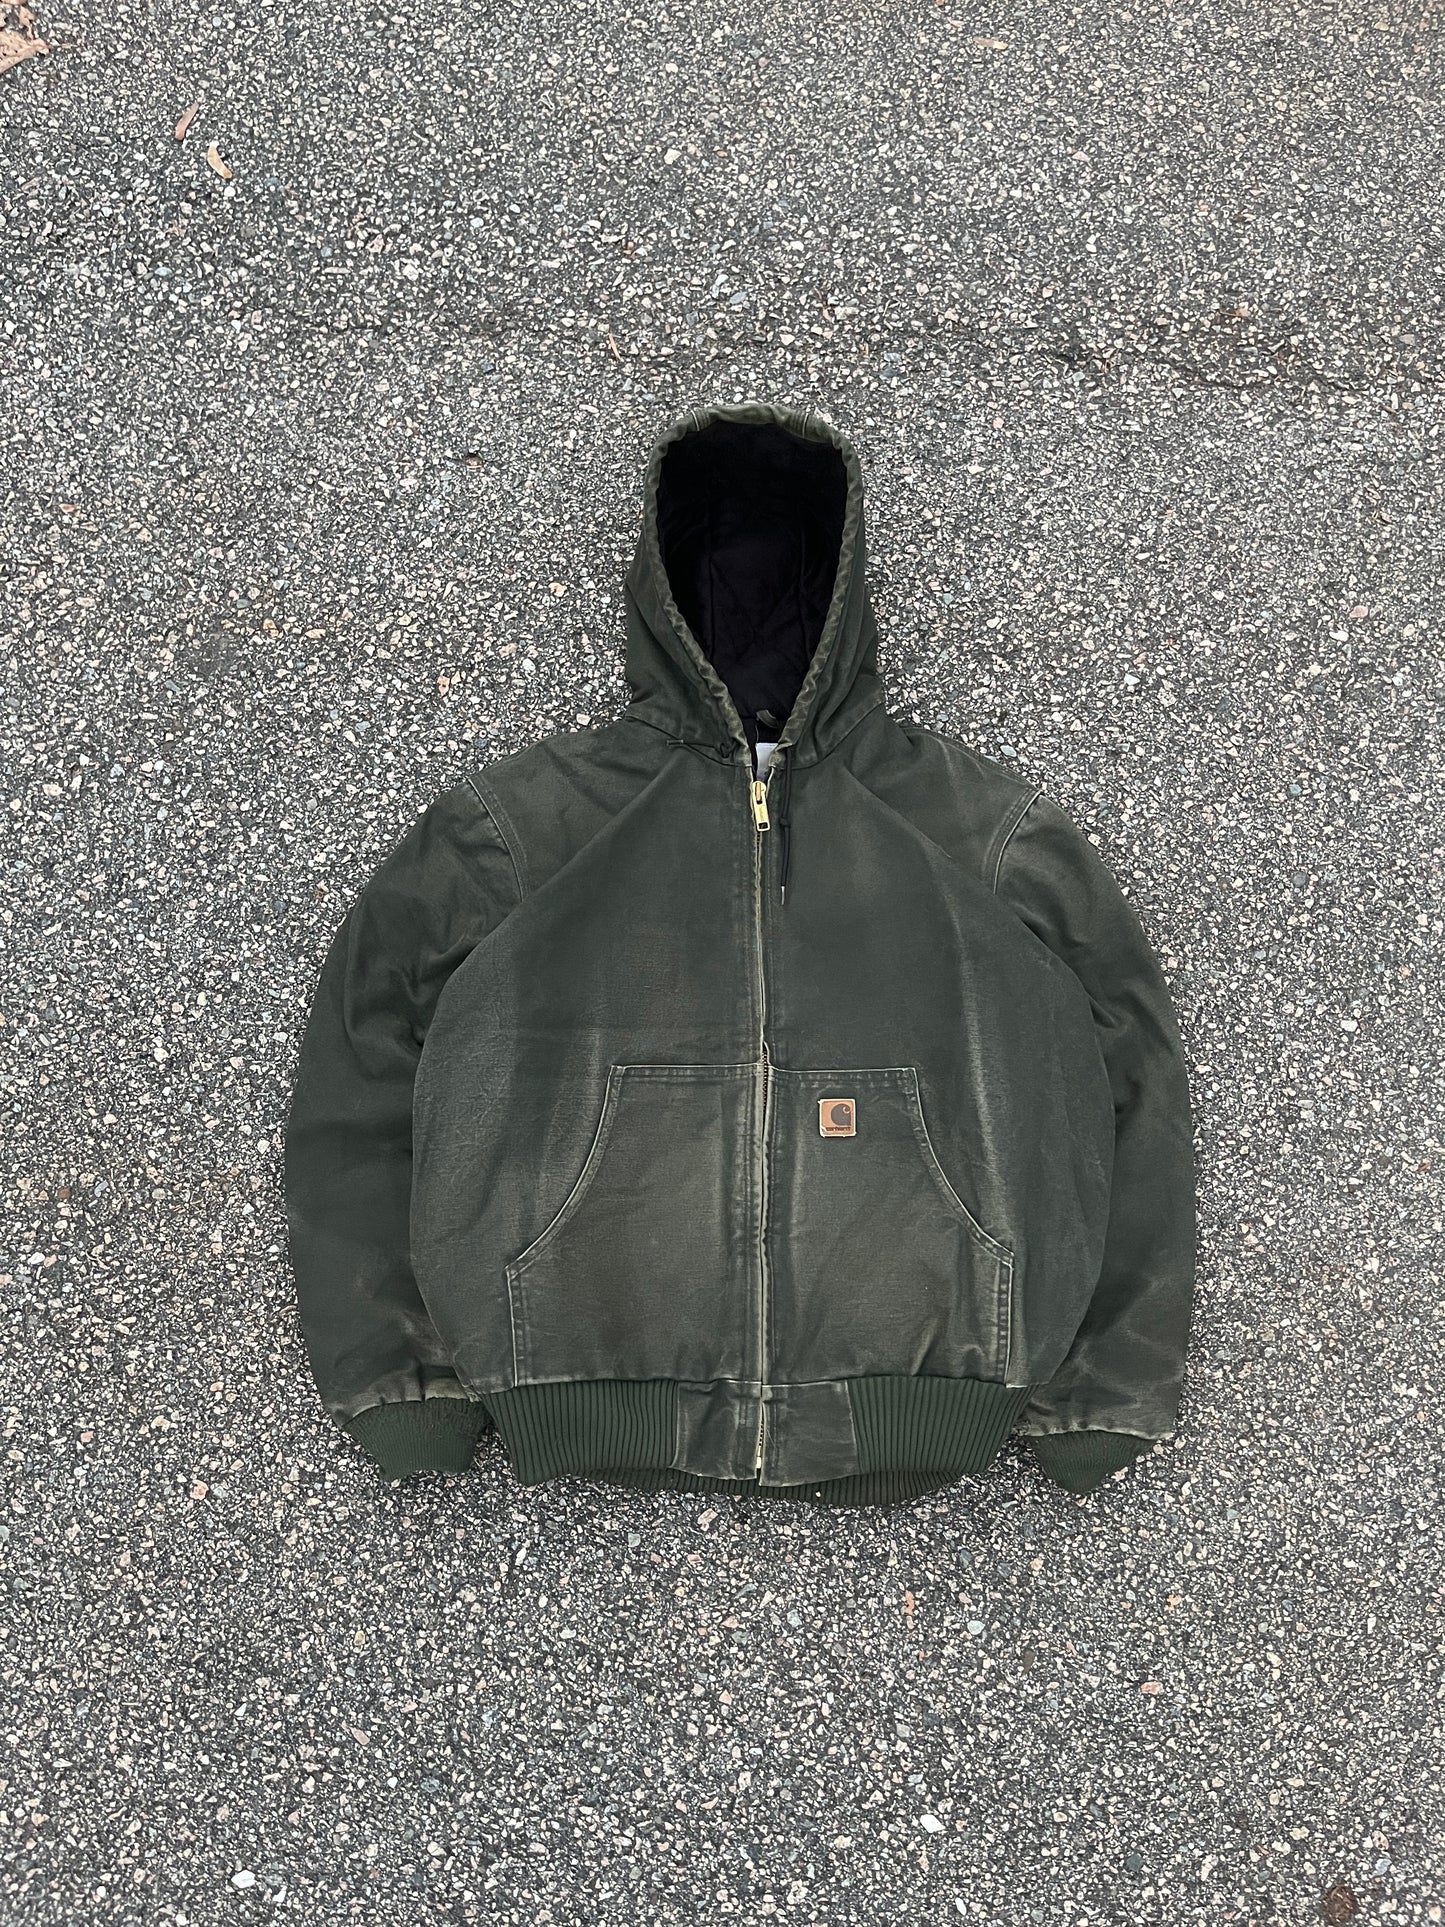 Faded Olive Green Carhartt Active Jacket - Large